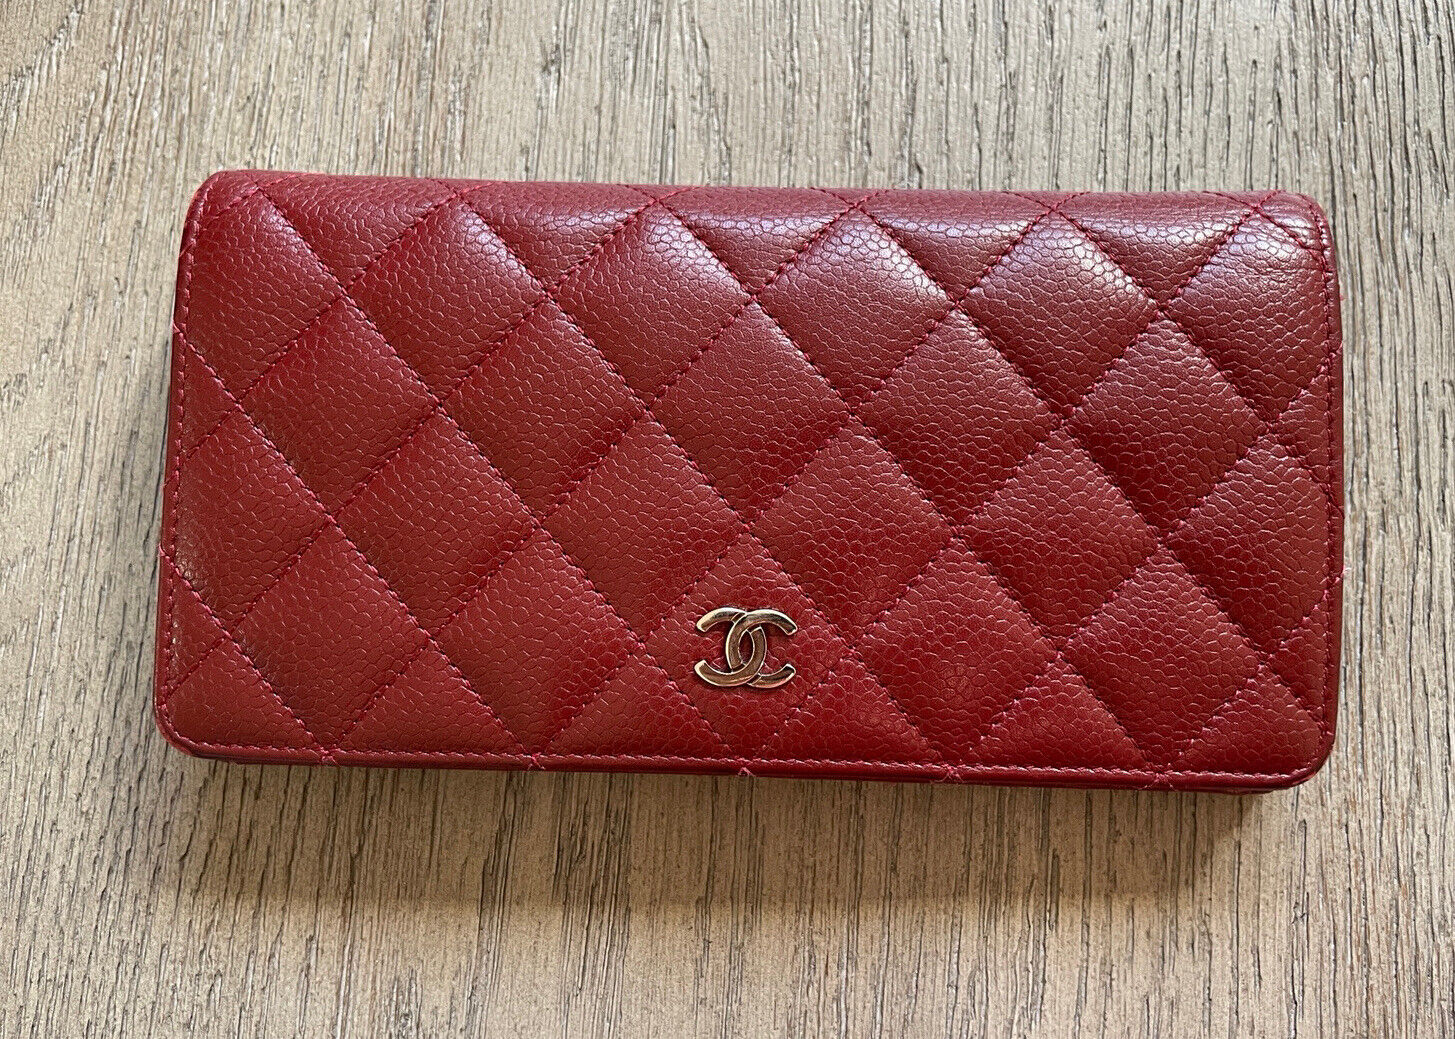 Chanel Caviar Quilted Yen Burgundy Red Silver Hardware Wallet